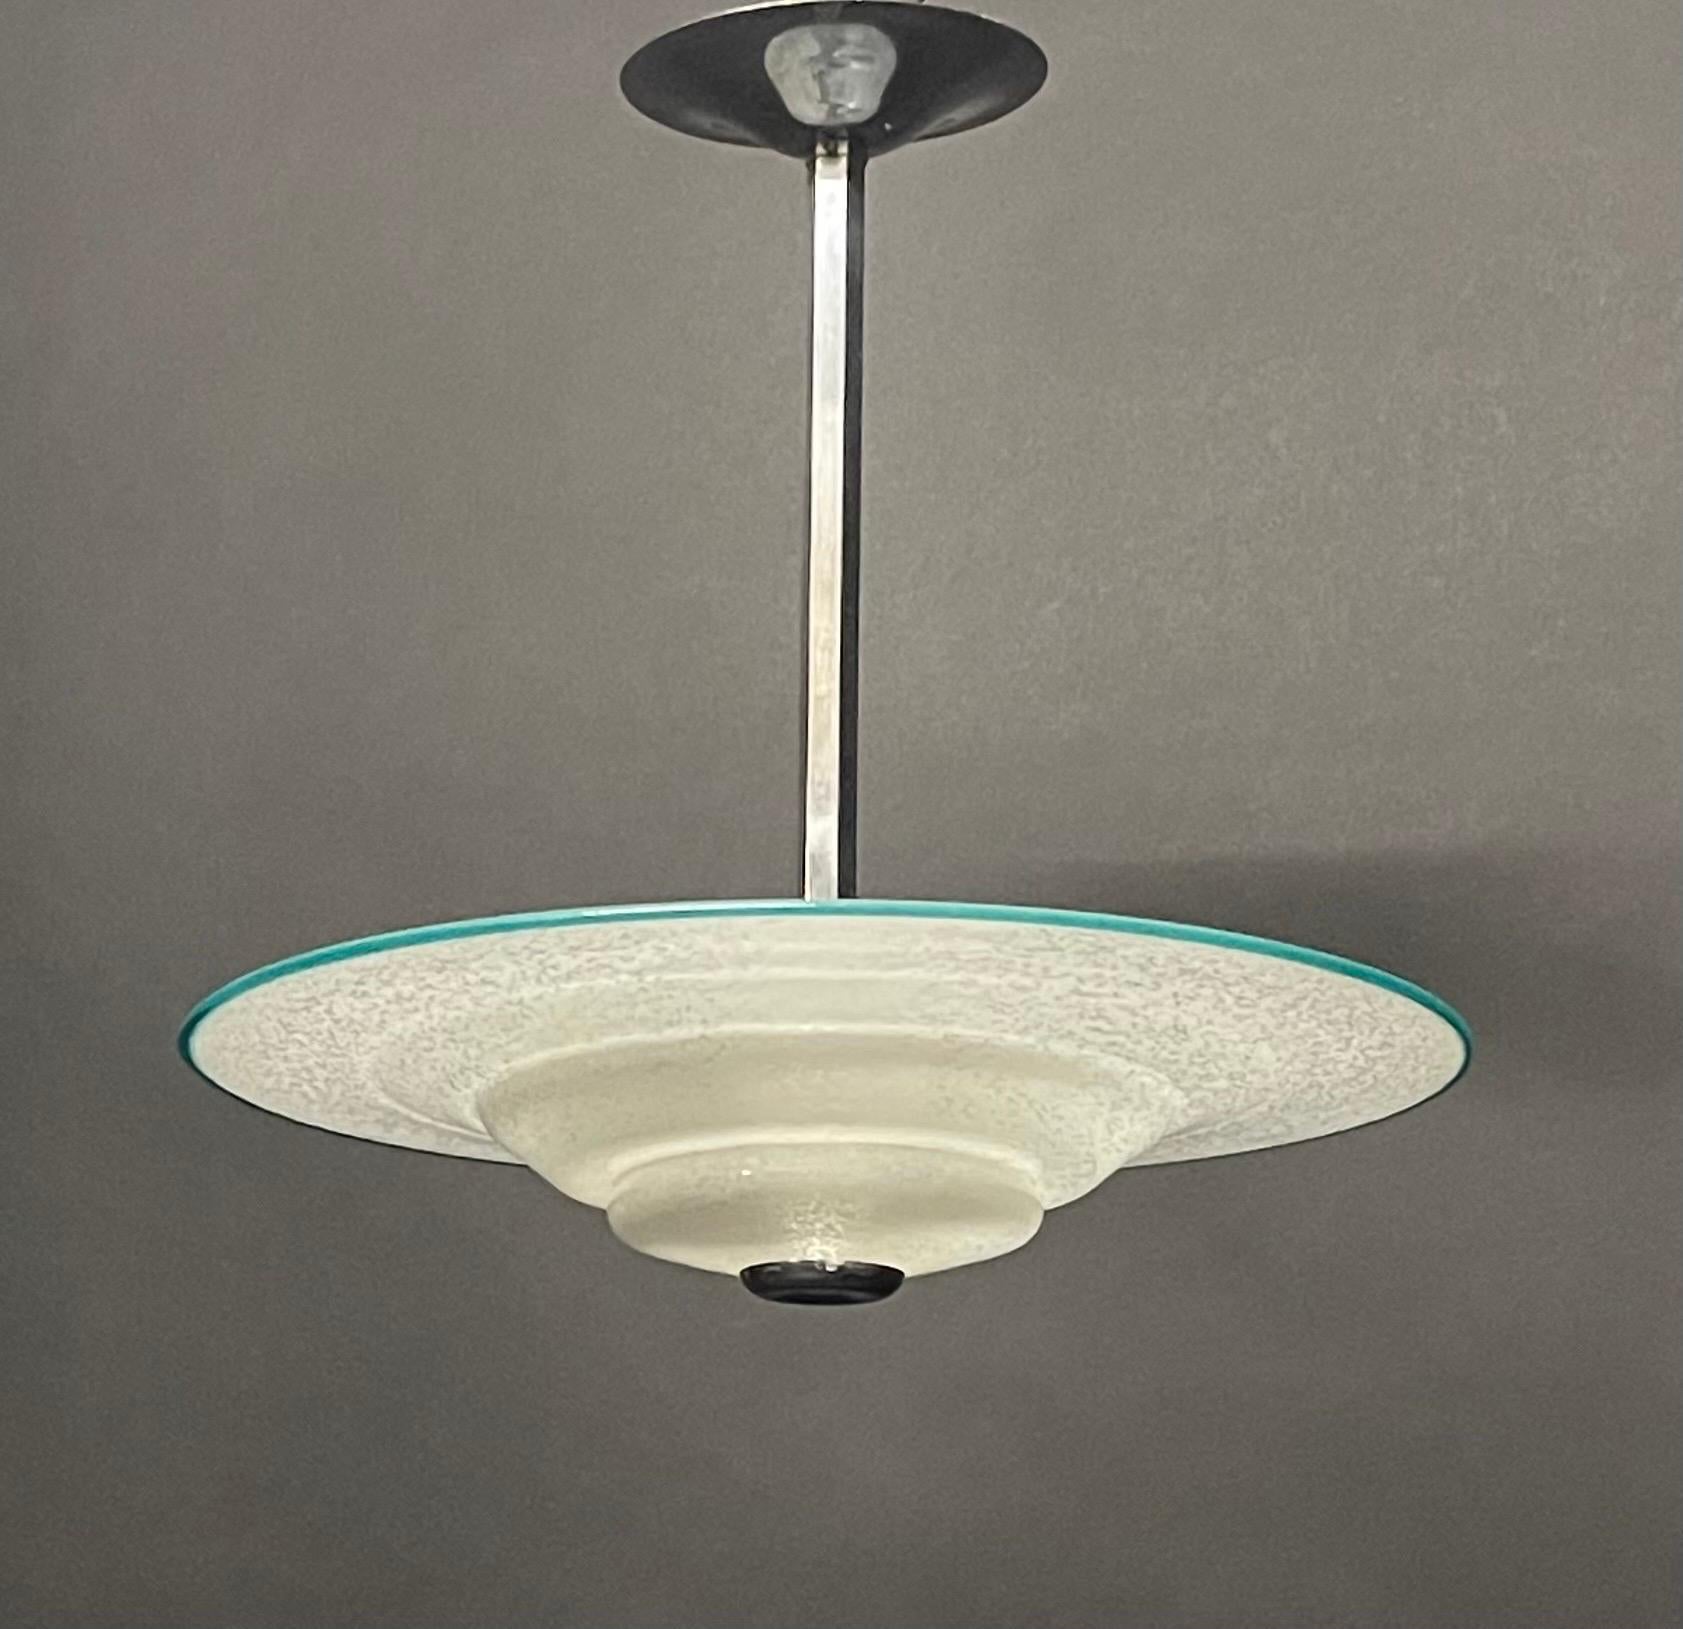 French Modernist Art Deco Glass and Chrome Pendant Chandelier, circa 1930s For Sale 7